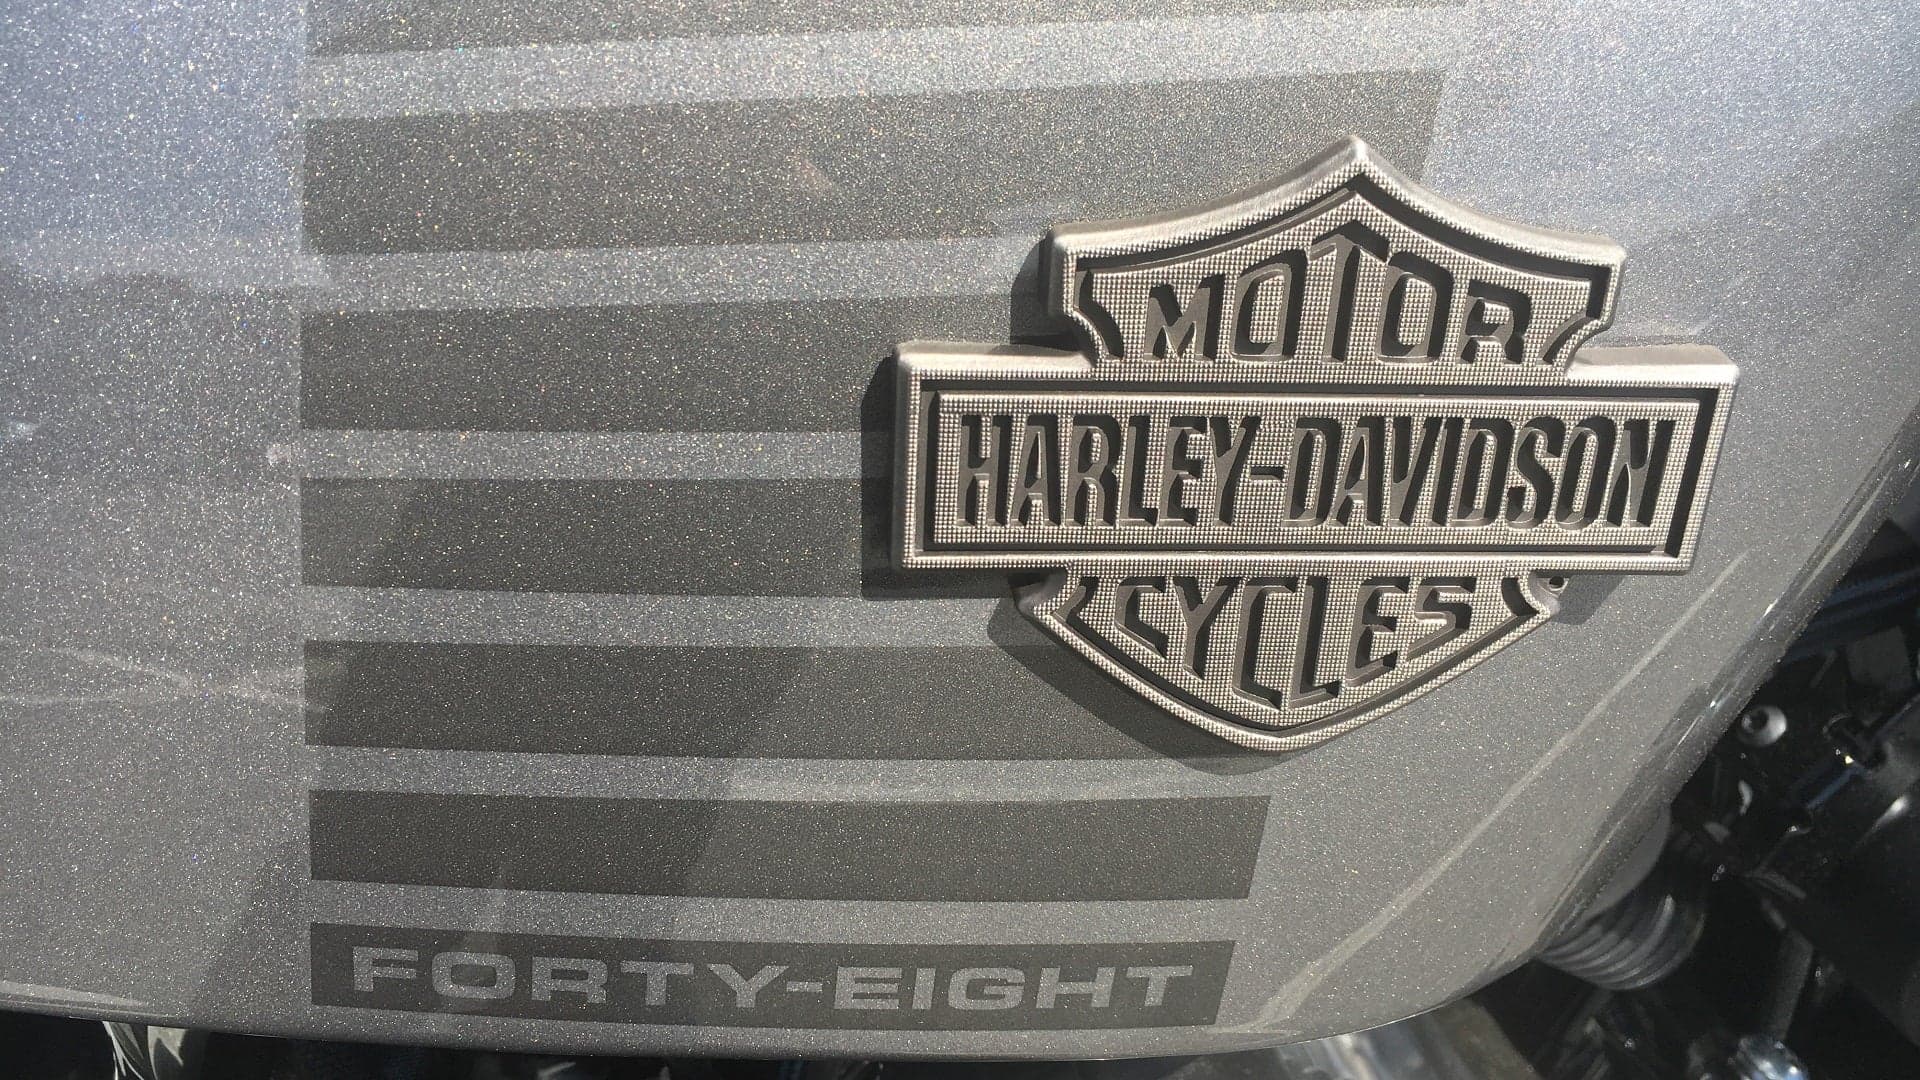 How Harley-Davidson Hides High-Tech Under its Old School Look